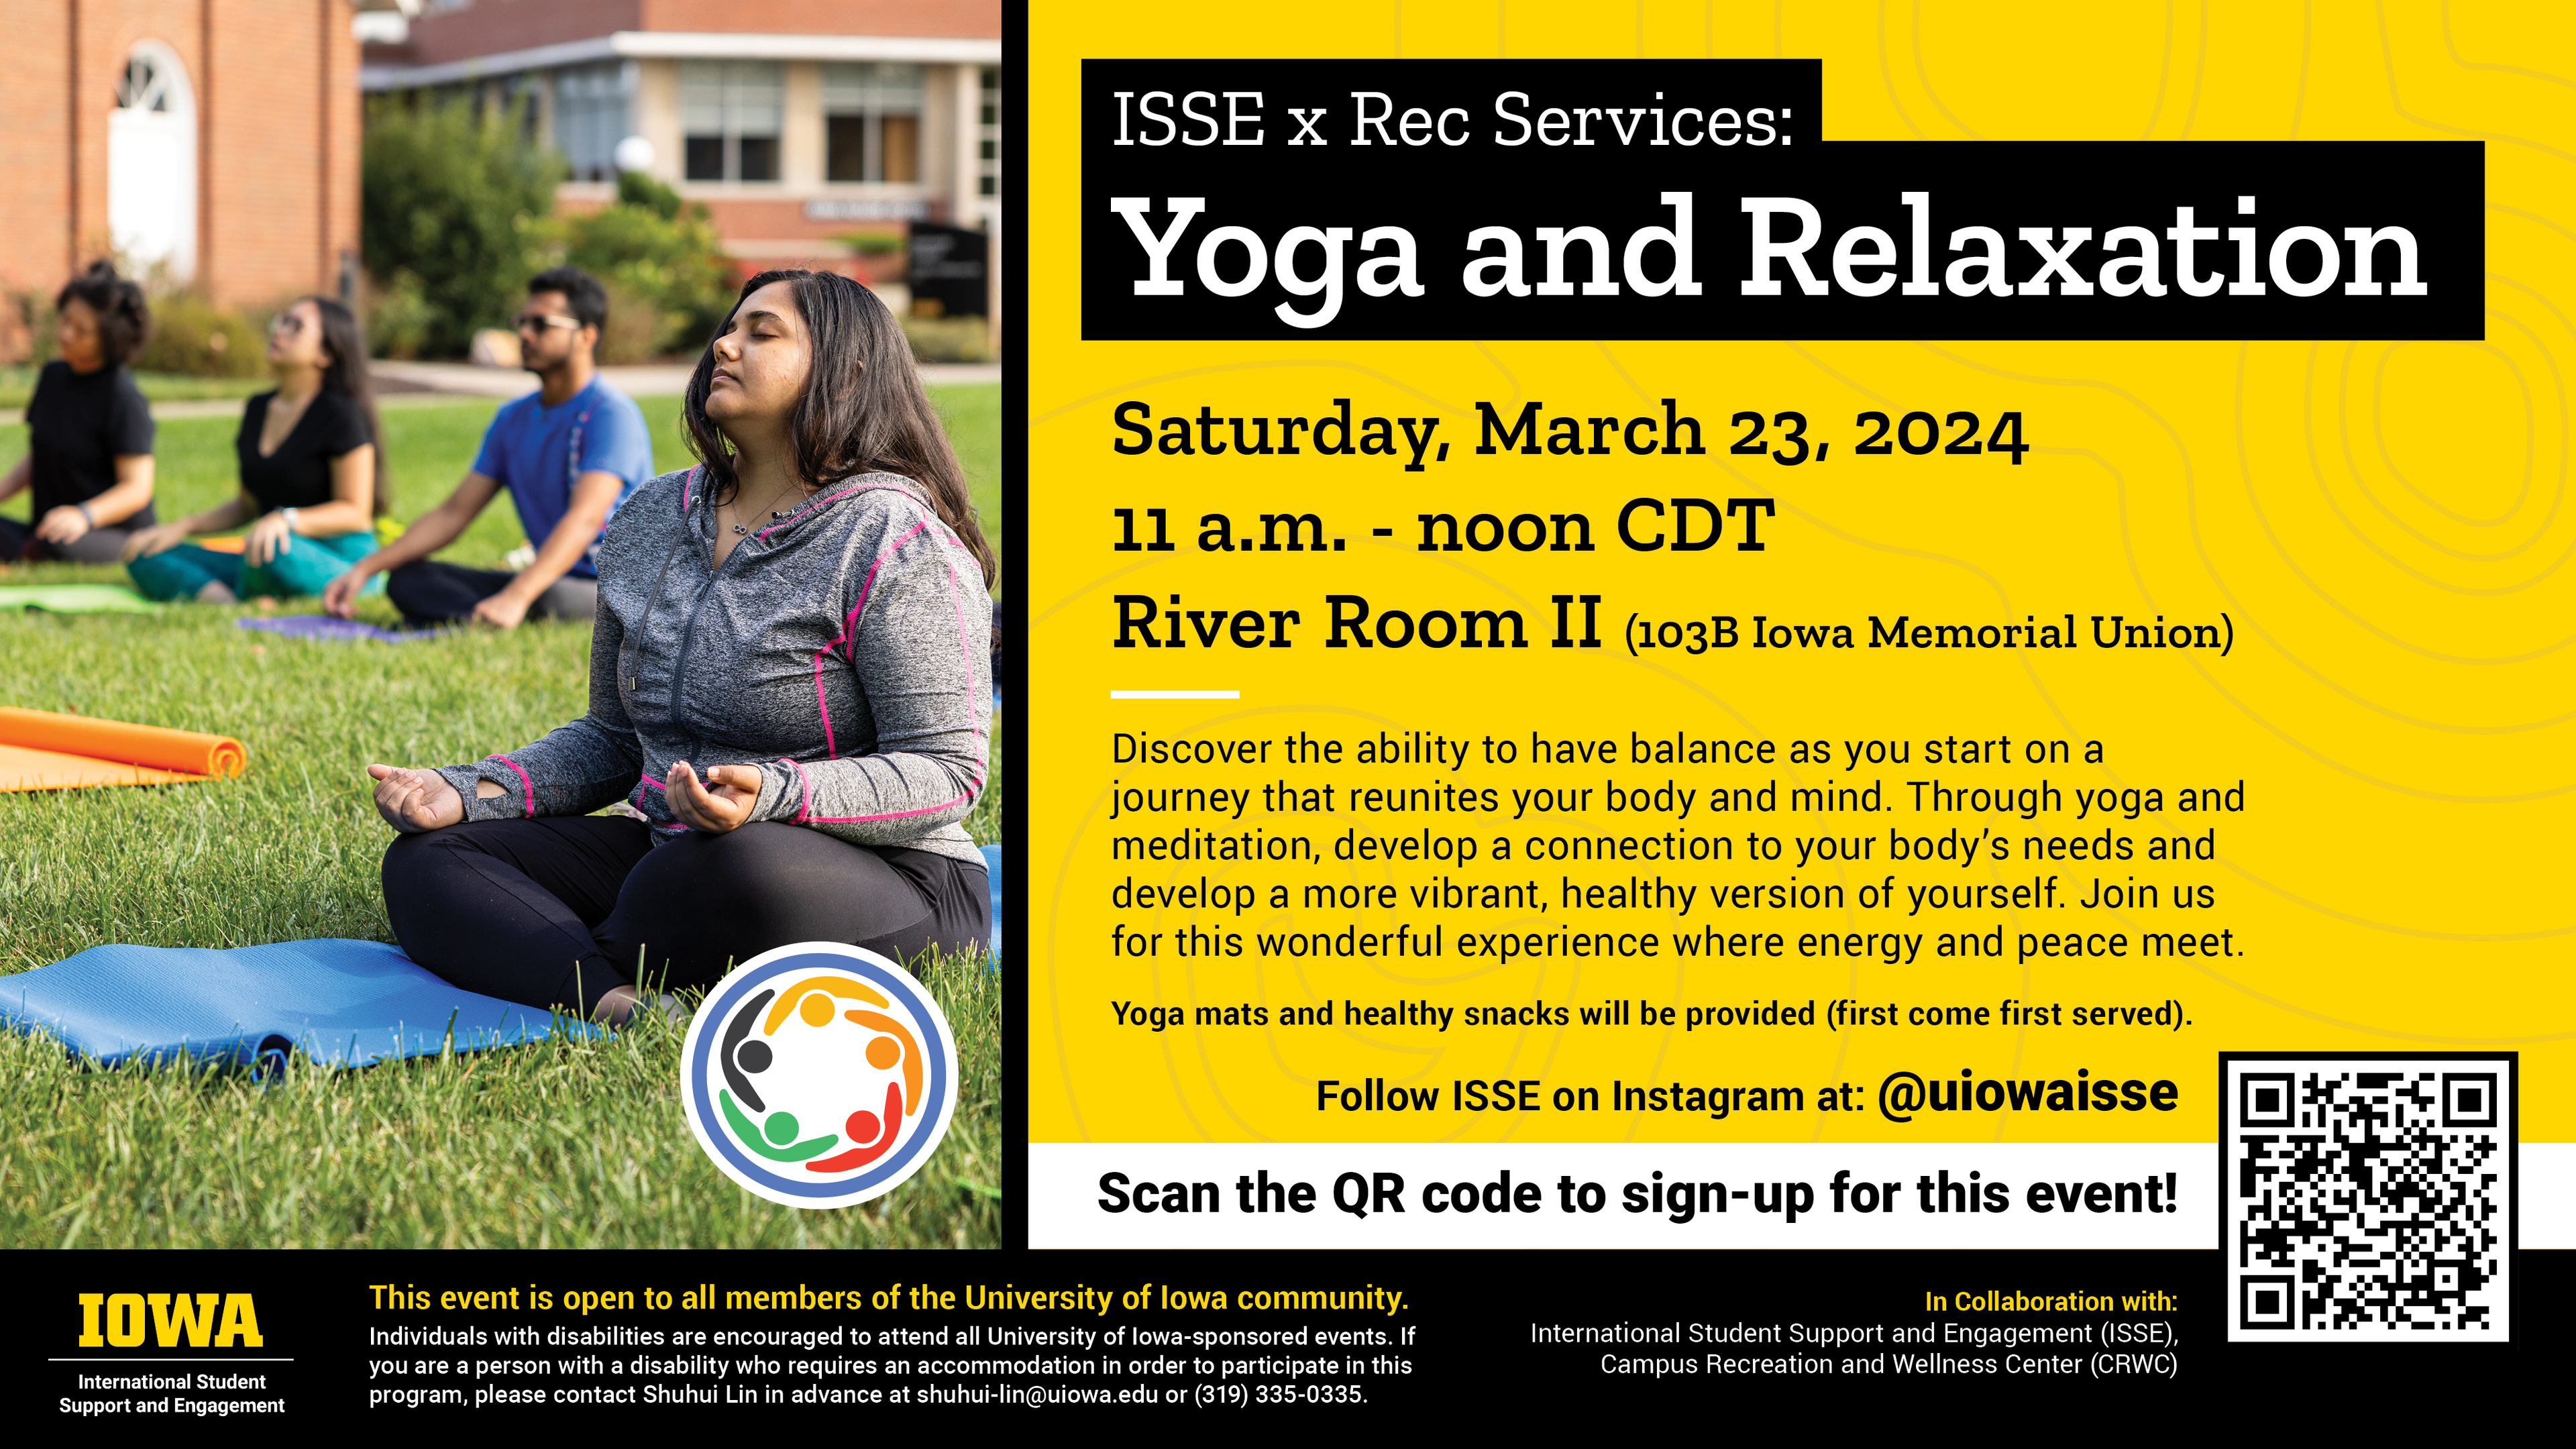 Join ISSE for a yoga and relaxation session Saturday, March 23 from 11 a.m. - noon. At the River Room II in the IMU